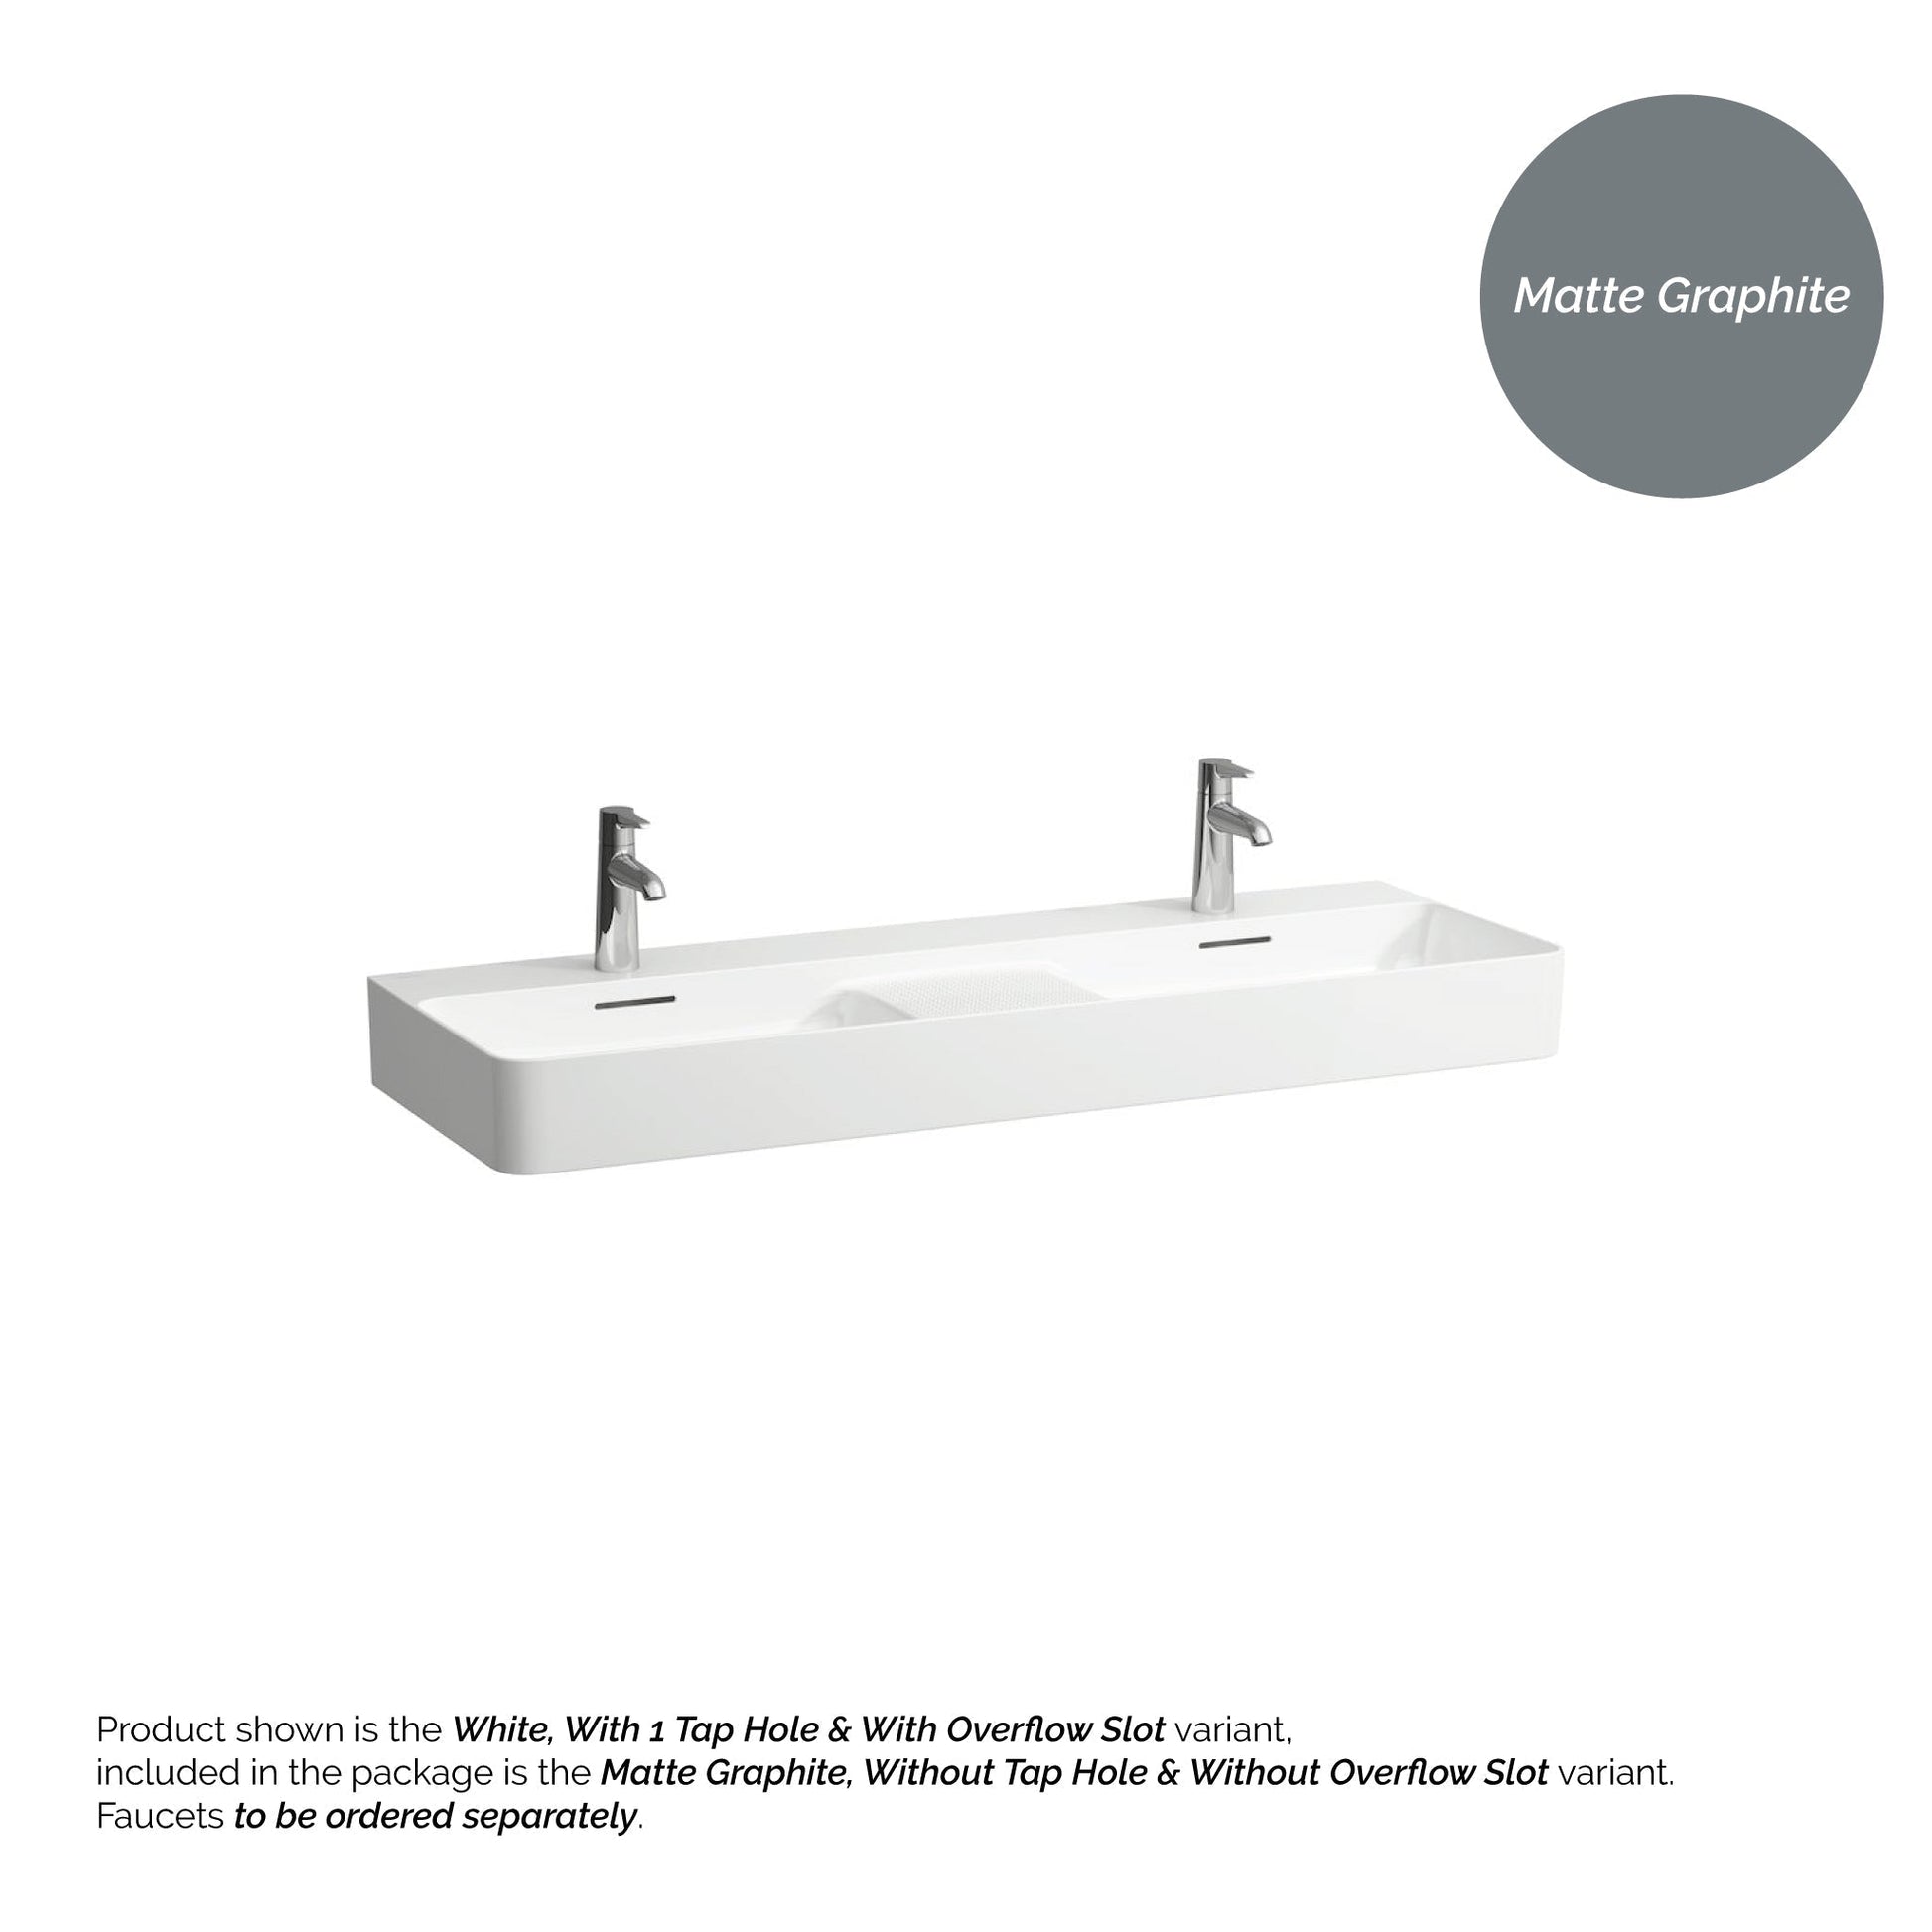 Laufen Val 47" x 17" Matte Graphite Ceramic Wall-Mounted Double Bathroom Sink Without Faucet Hole and Overflow Slot